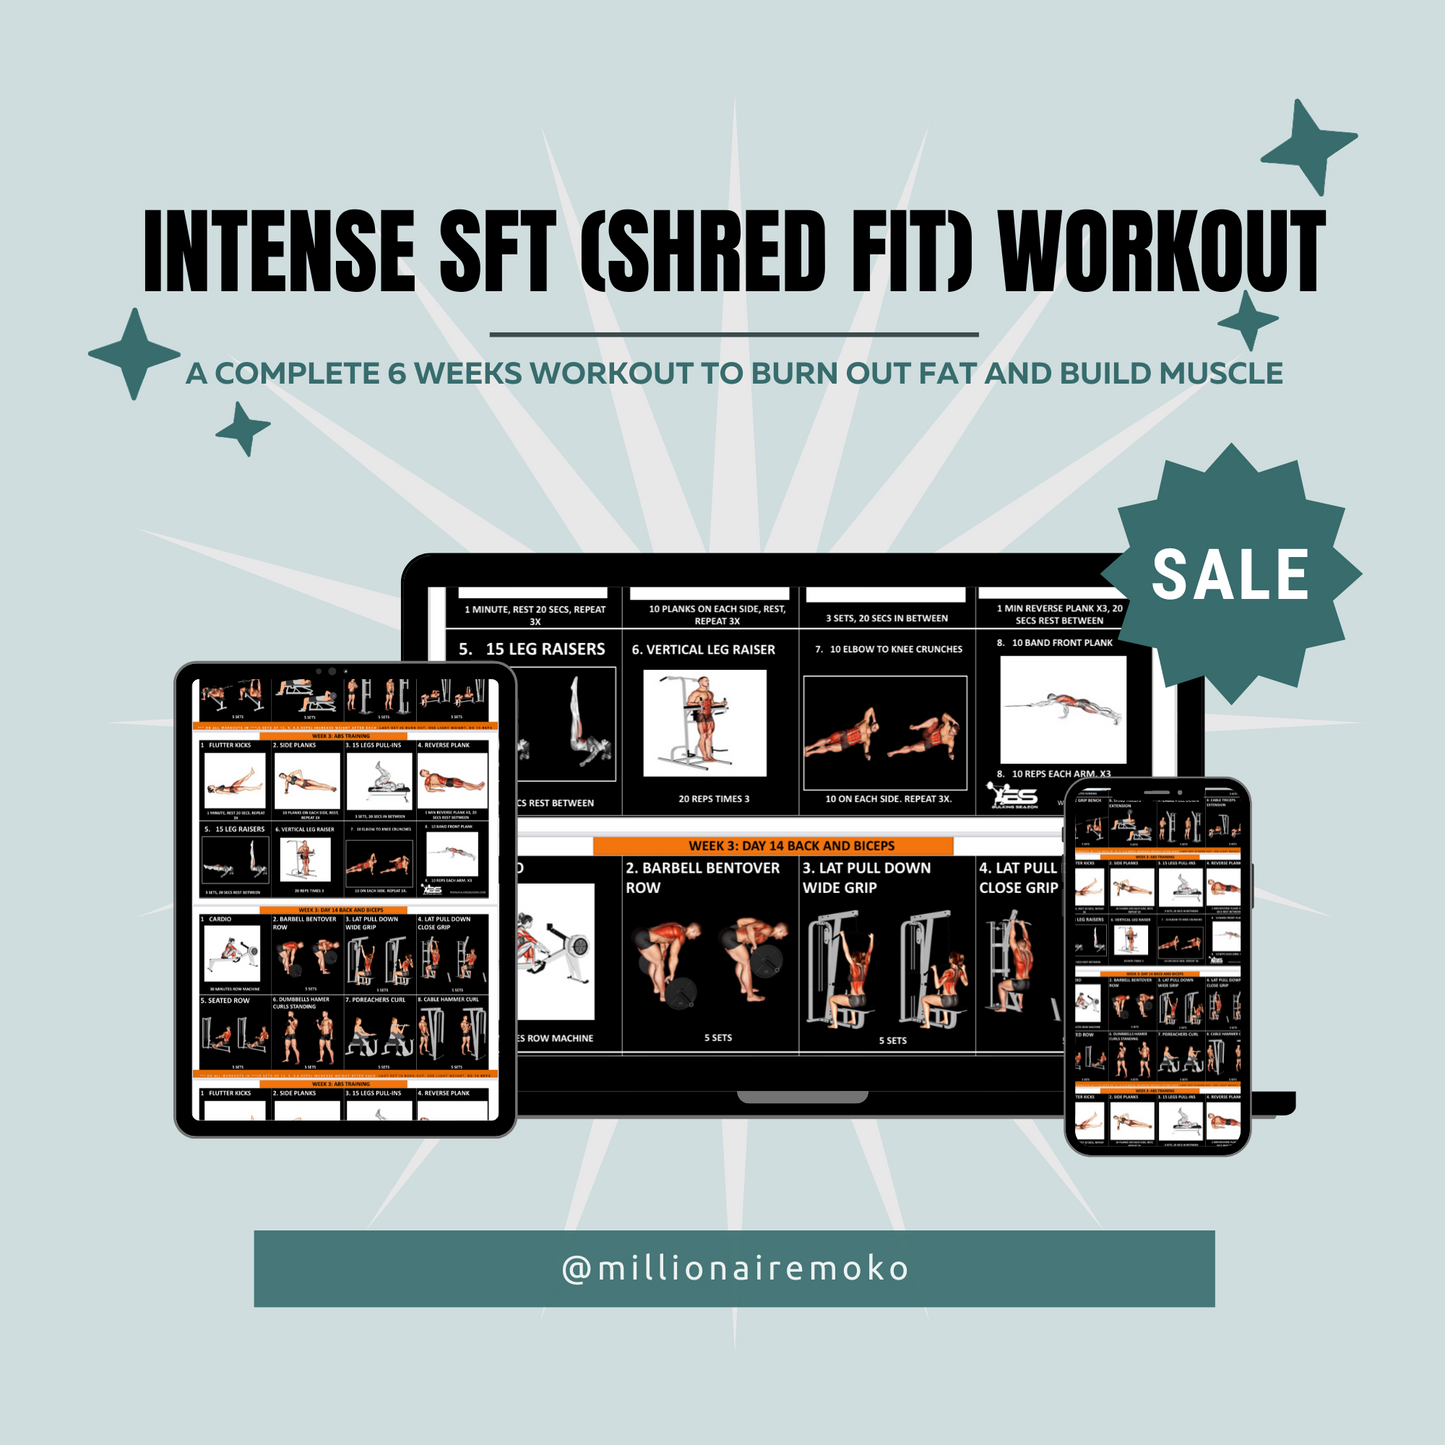 THE SHRED FIT (SFT) WORKOUT PLAN + A FREE SHIRT BUNDLE